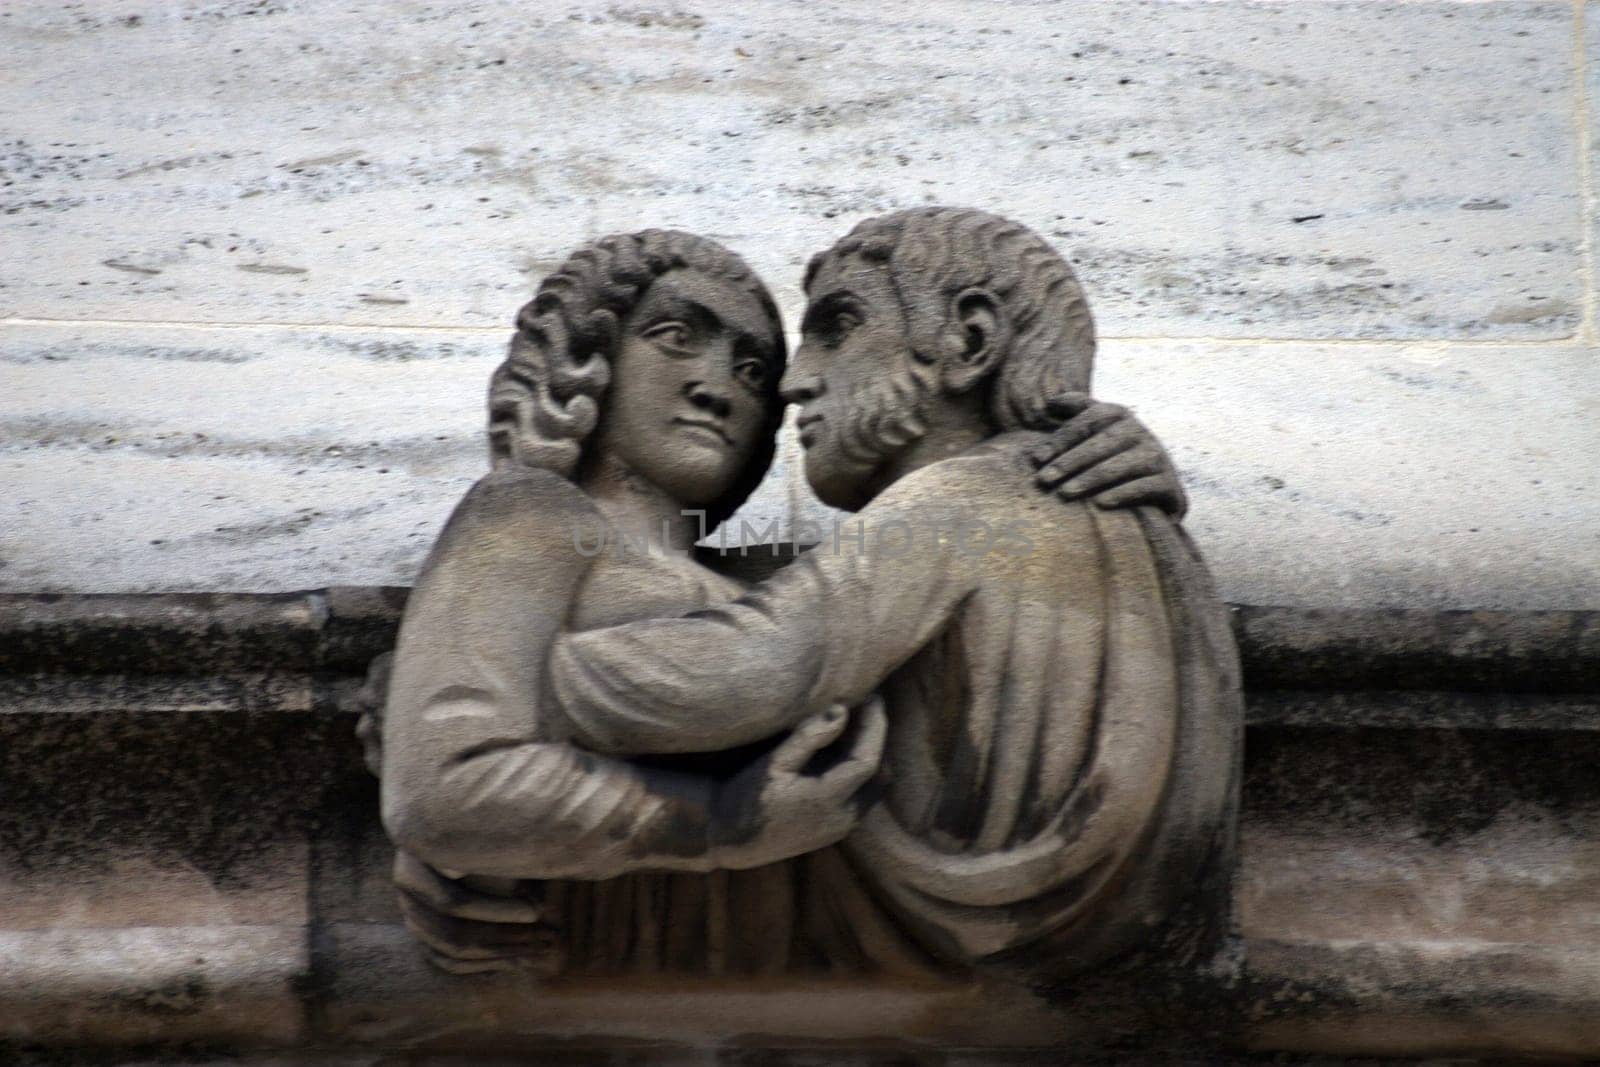 A curious gargoyle or grotesque sculptures on historic university buildings in Oxford, UK.